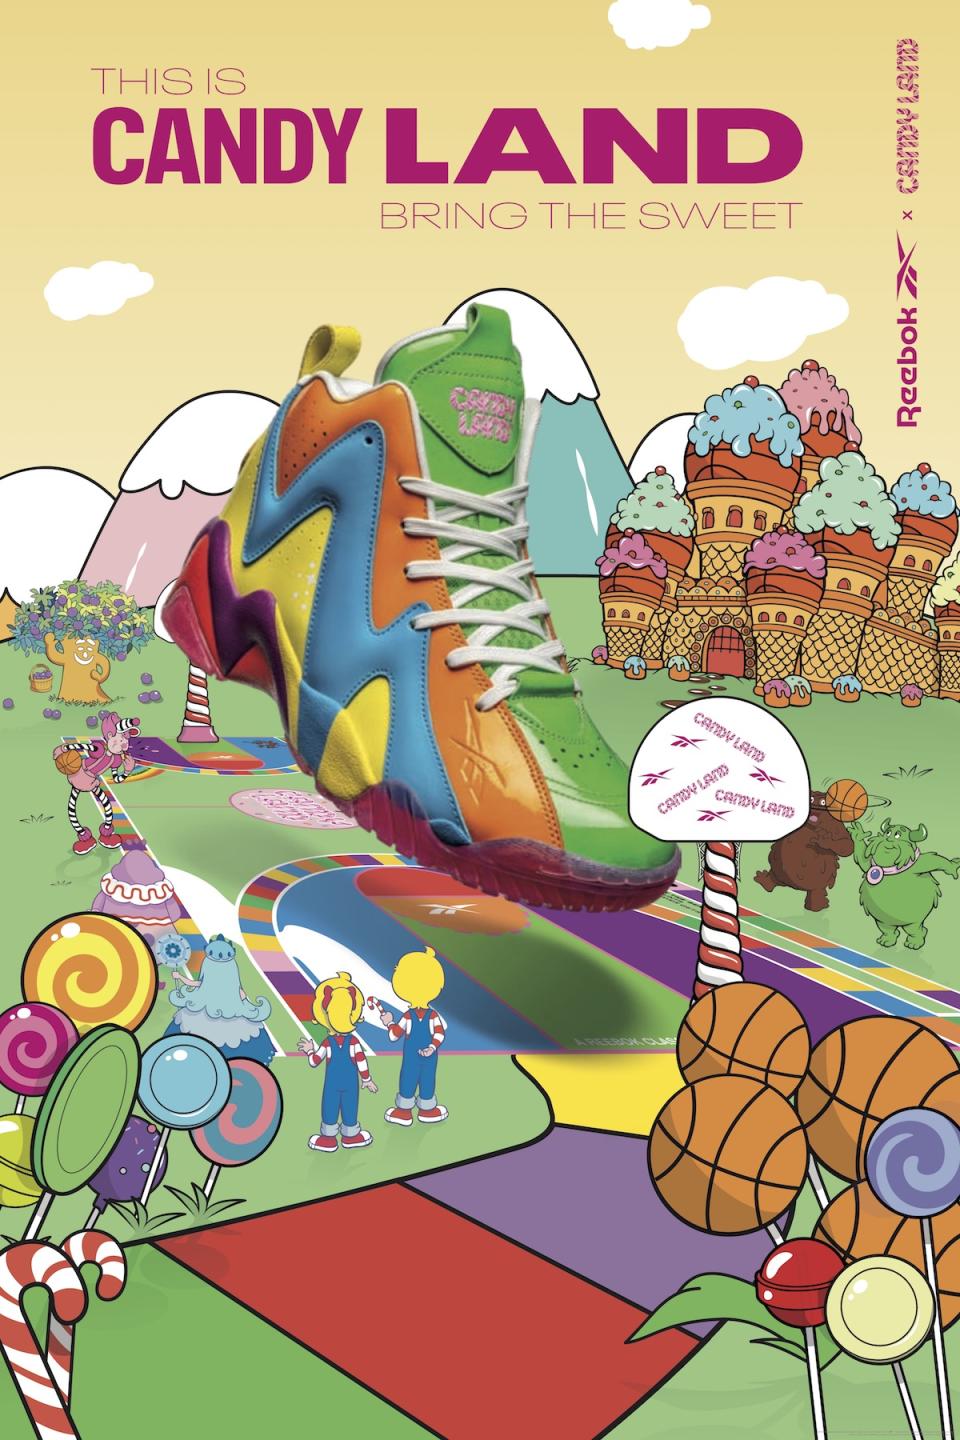 Reebok's Bring The Sweet Candy Land sneakers